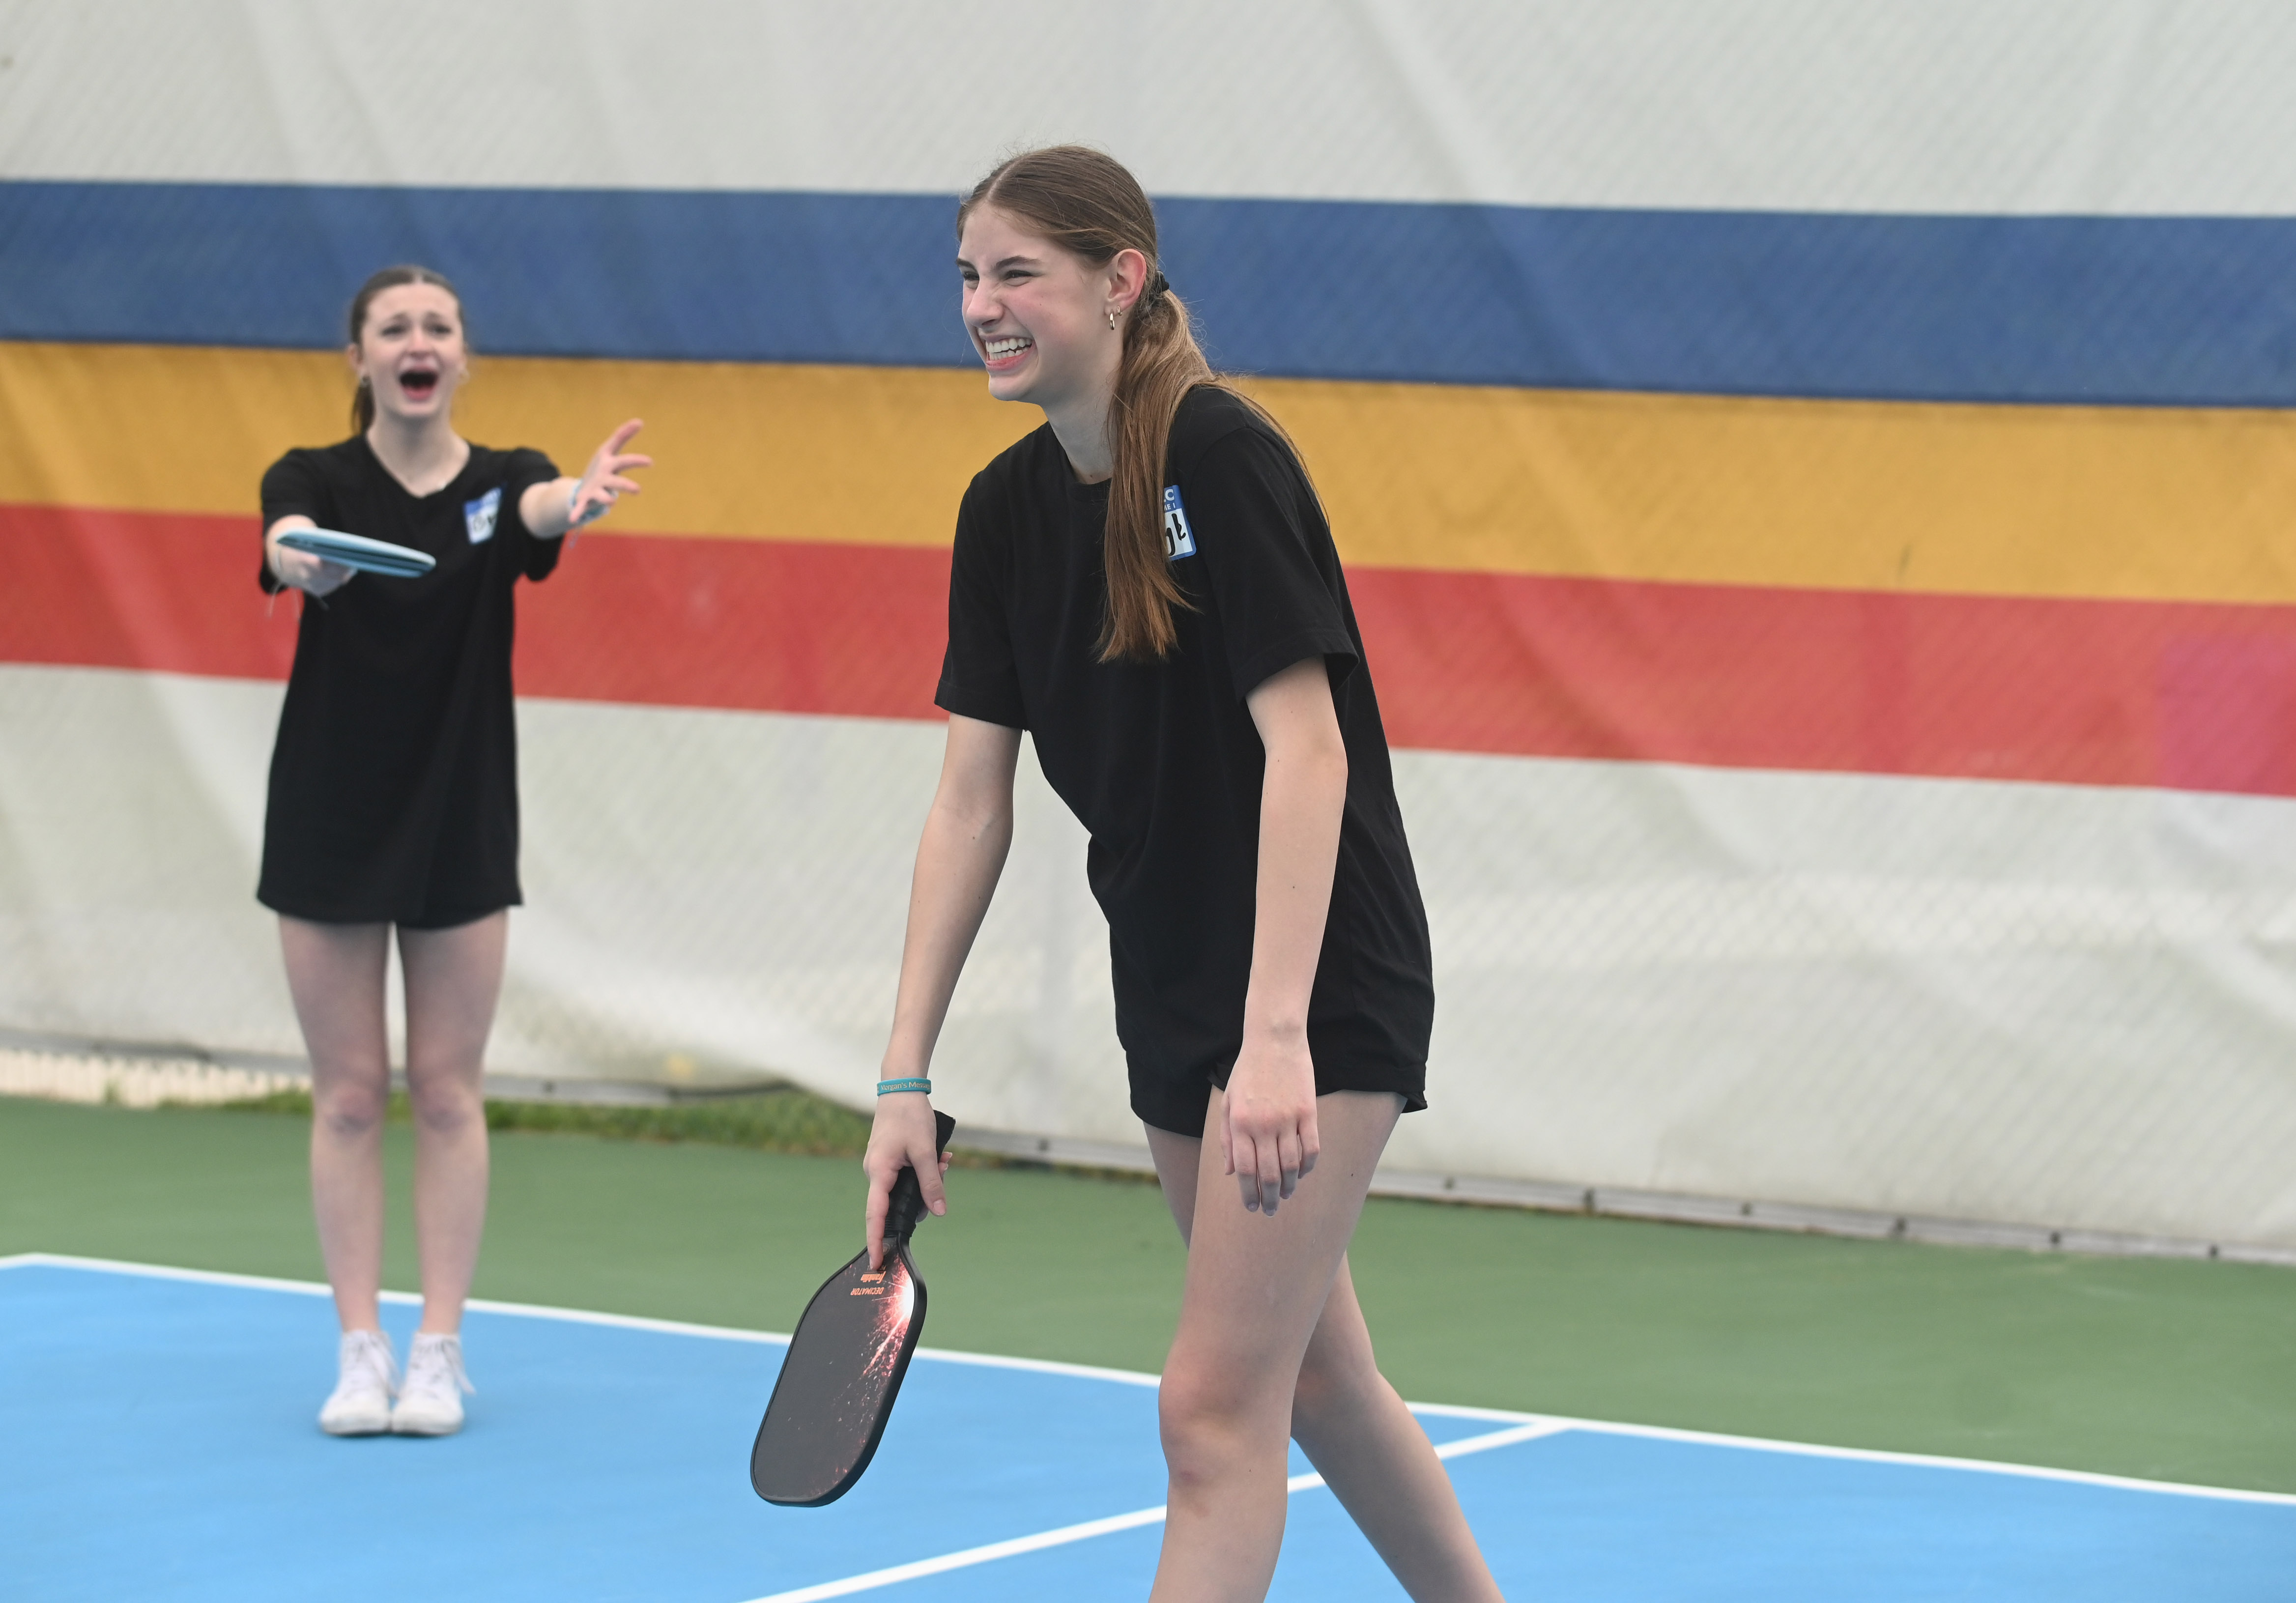 Freshmen Ryann Hoke, left, and Brenna Maas react after a missed shot during a pickleball tournament at Coppermine 4 Seasons on Tuesday. The tournament was organized by Manchester Valley High School juniors Brady Bonney and Leigh Hoke to raise money and support for Morgan's Message, a nonprofit supporting student-athlete mental health initiatives. (Brian Krista/staff photo)